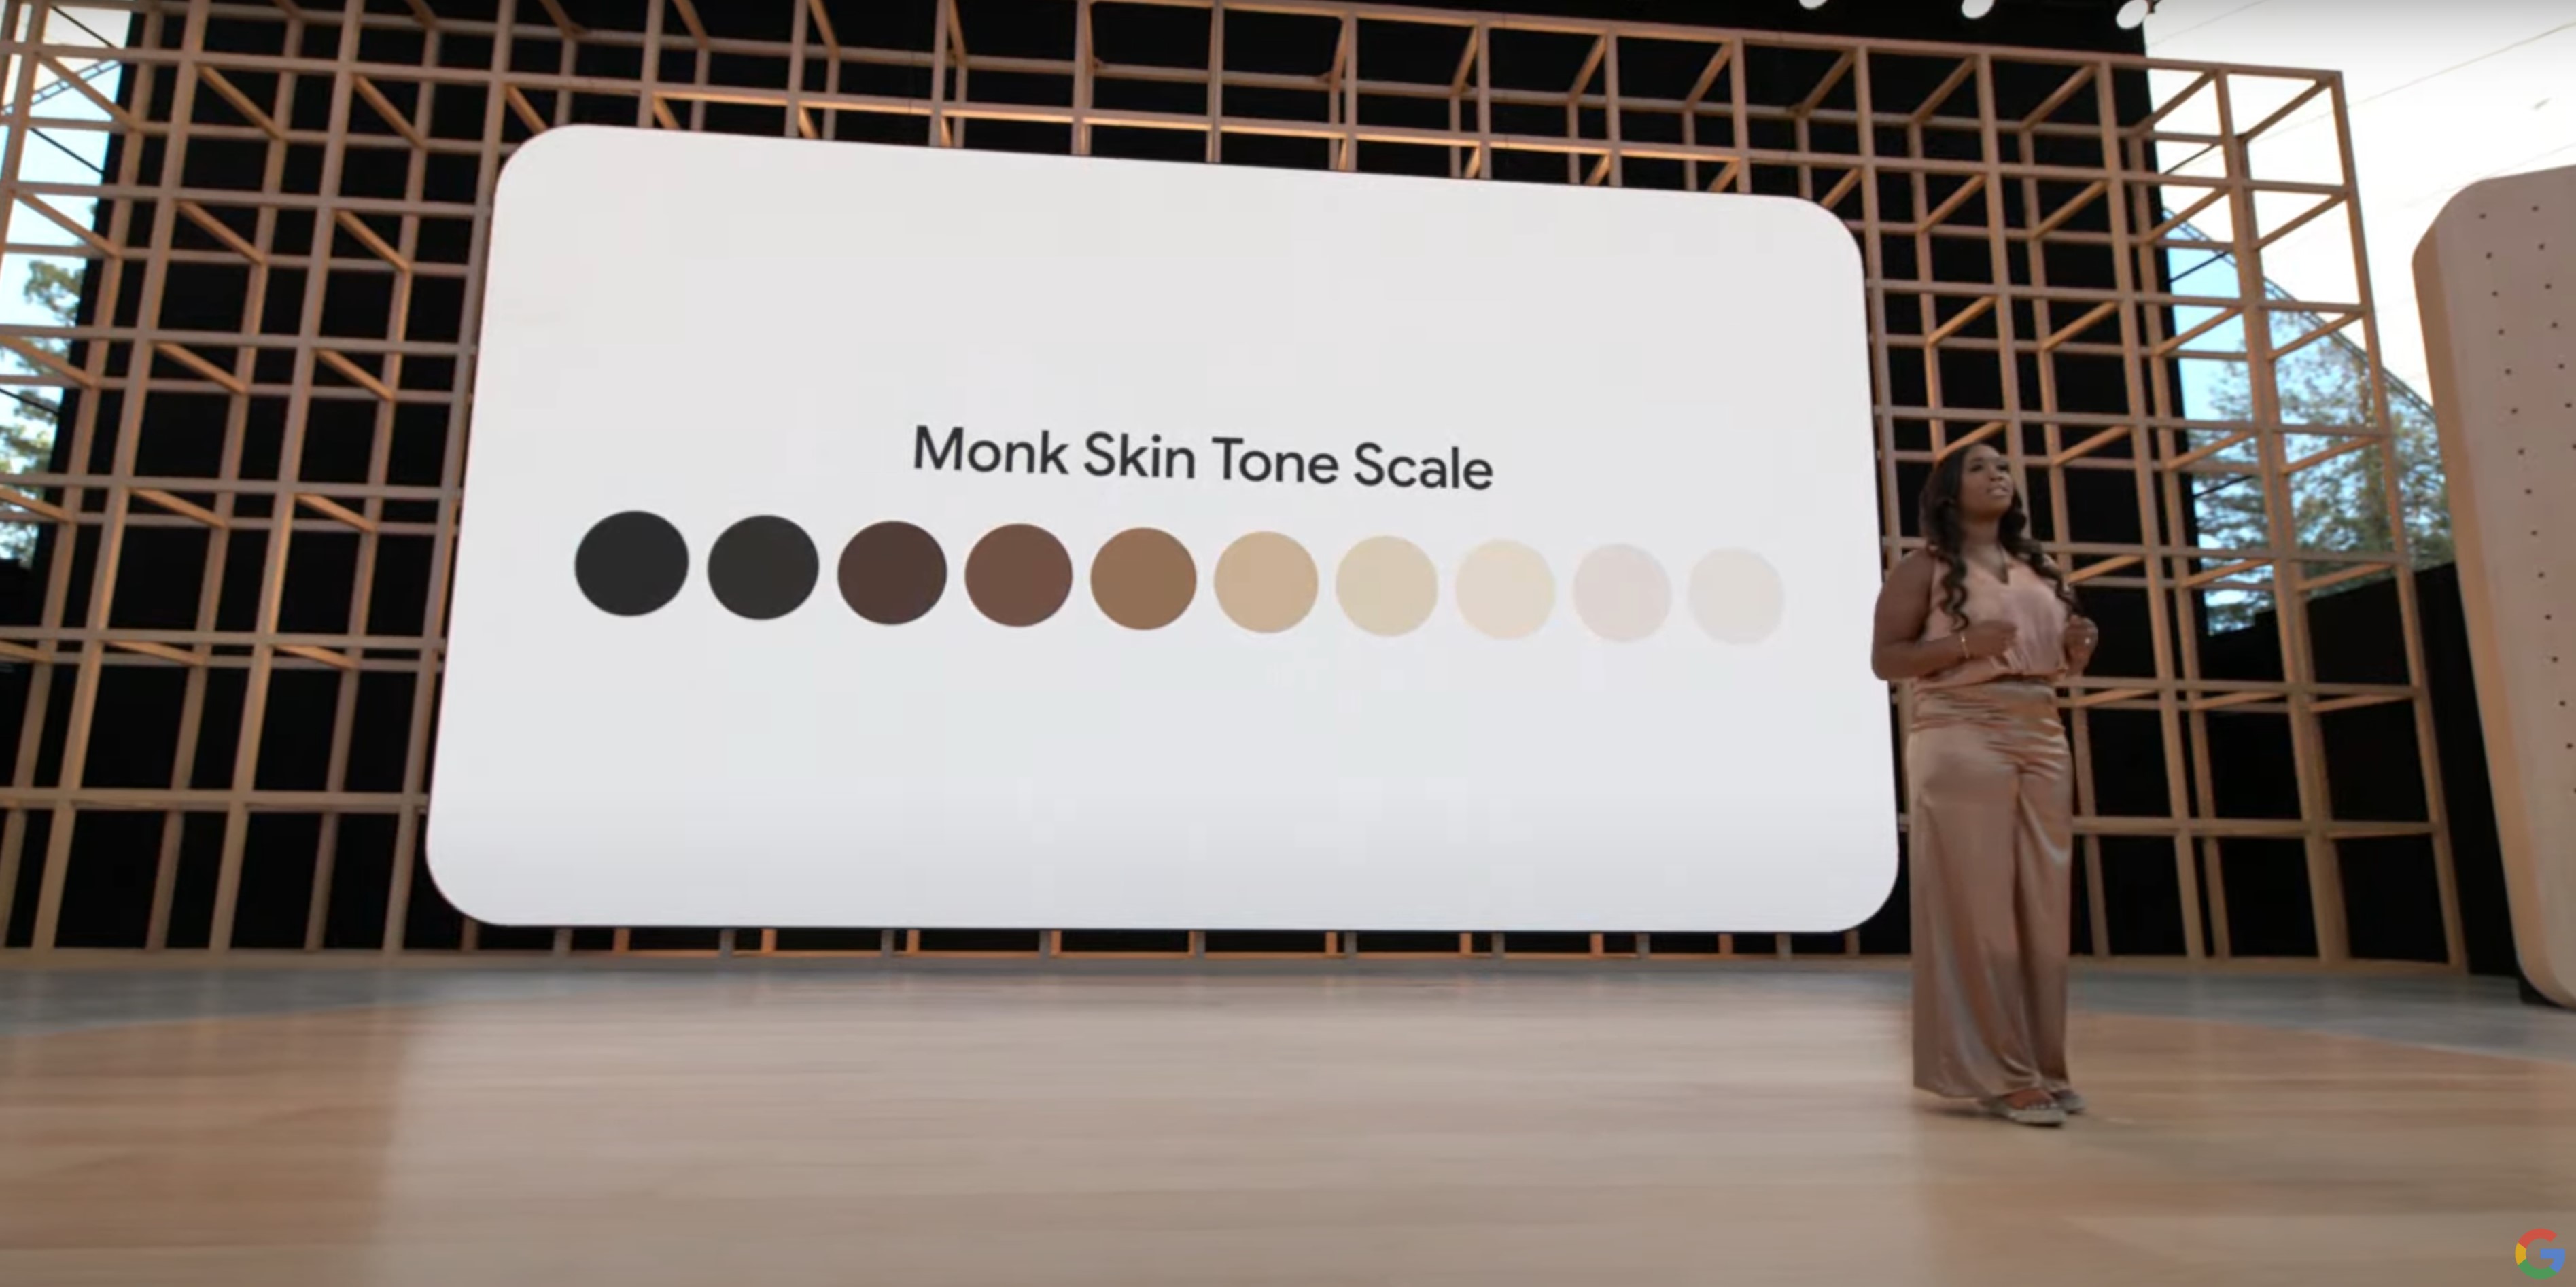 As part of its ongoing efforts to promote racial equity, Google is adding new skin tone filters to serarch.